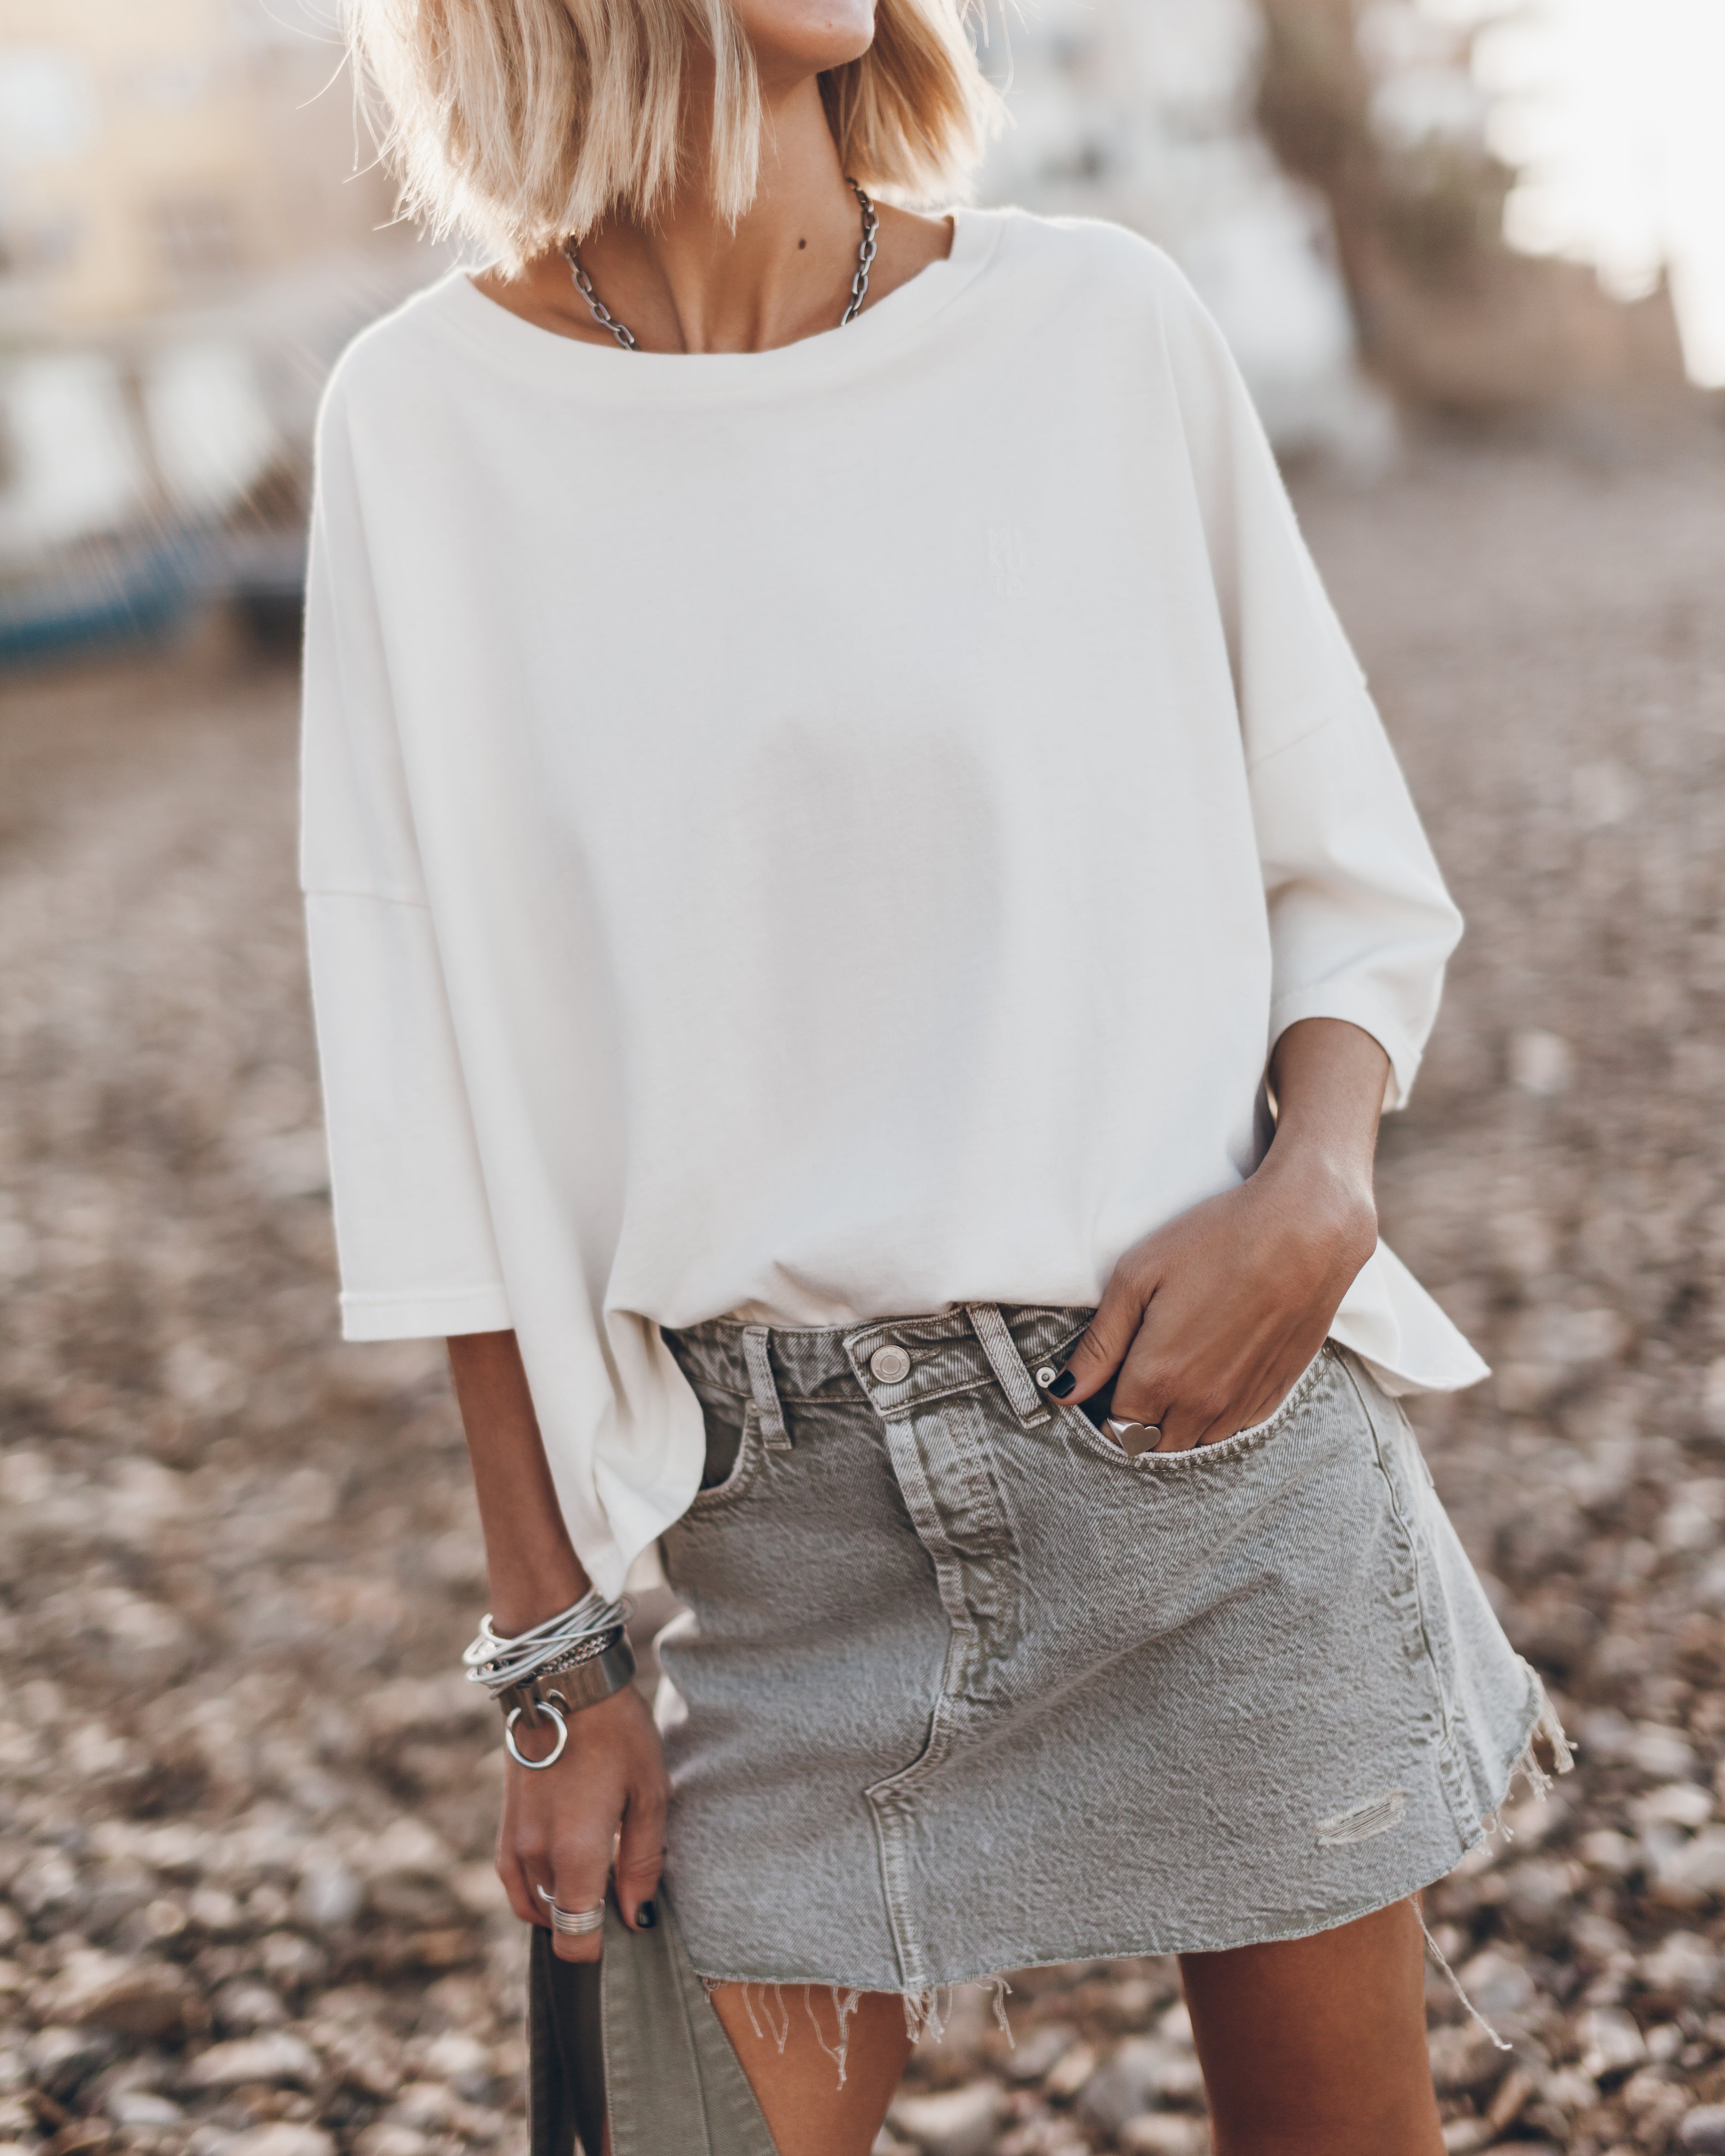 The White Loose Cotton T-Shirt